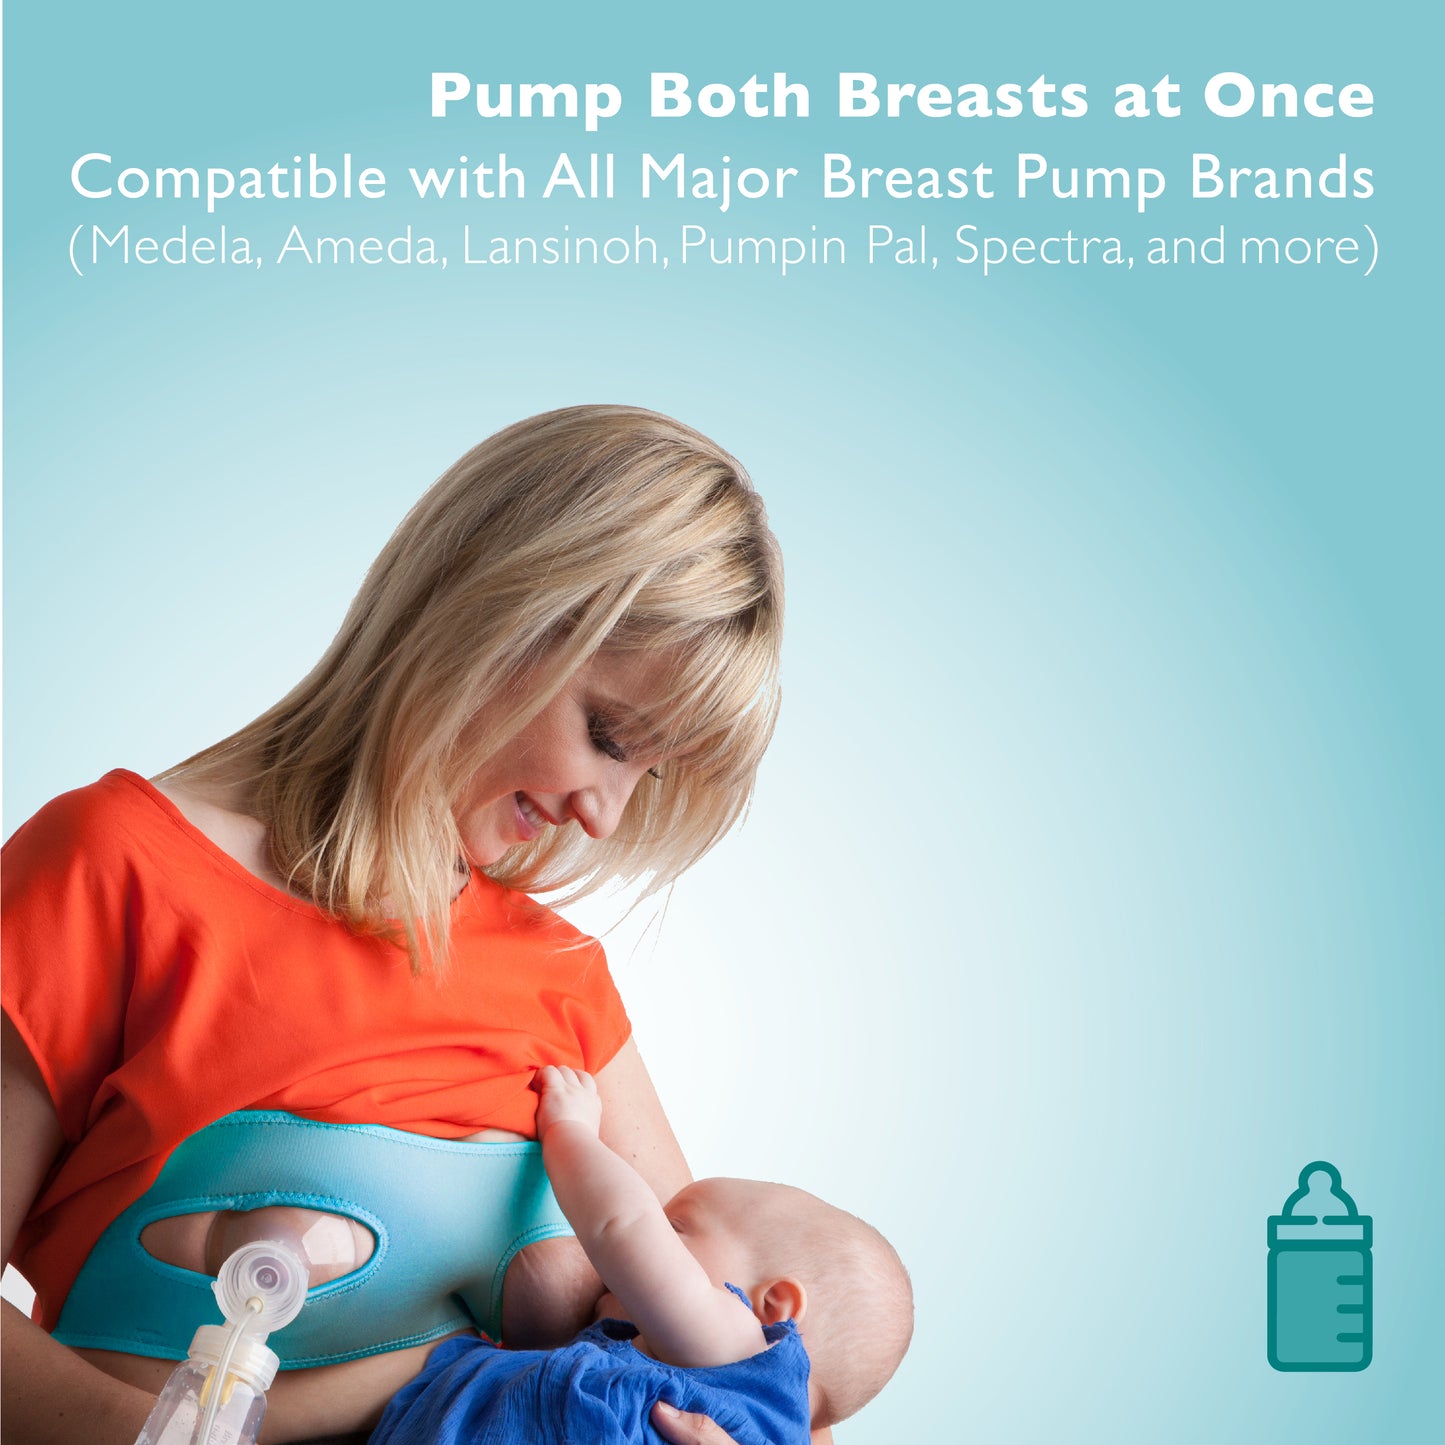 Pump Strap HandsFree Pumping & Nursing Bra – Pump More in Less Time - Fits All Moms, Turquoise